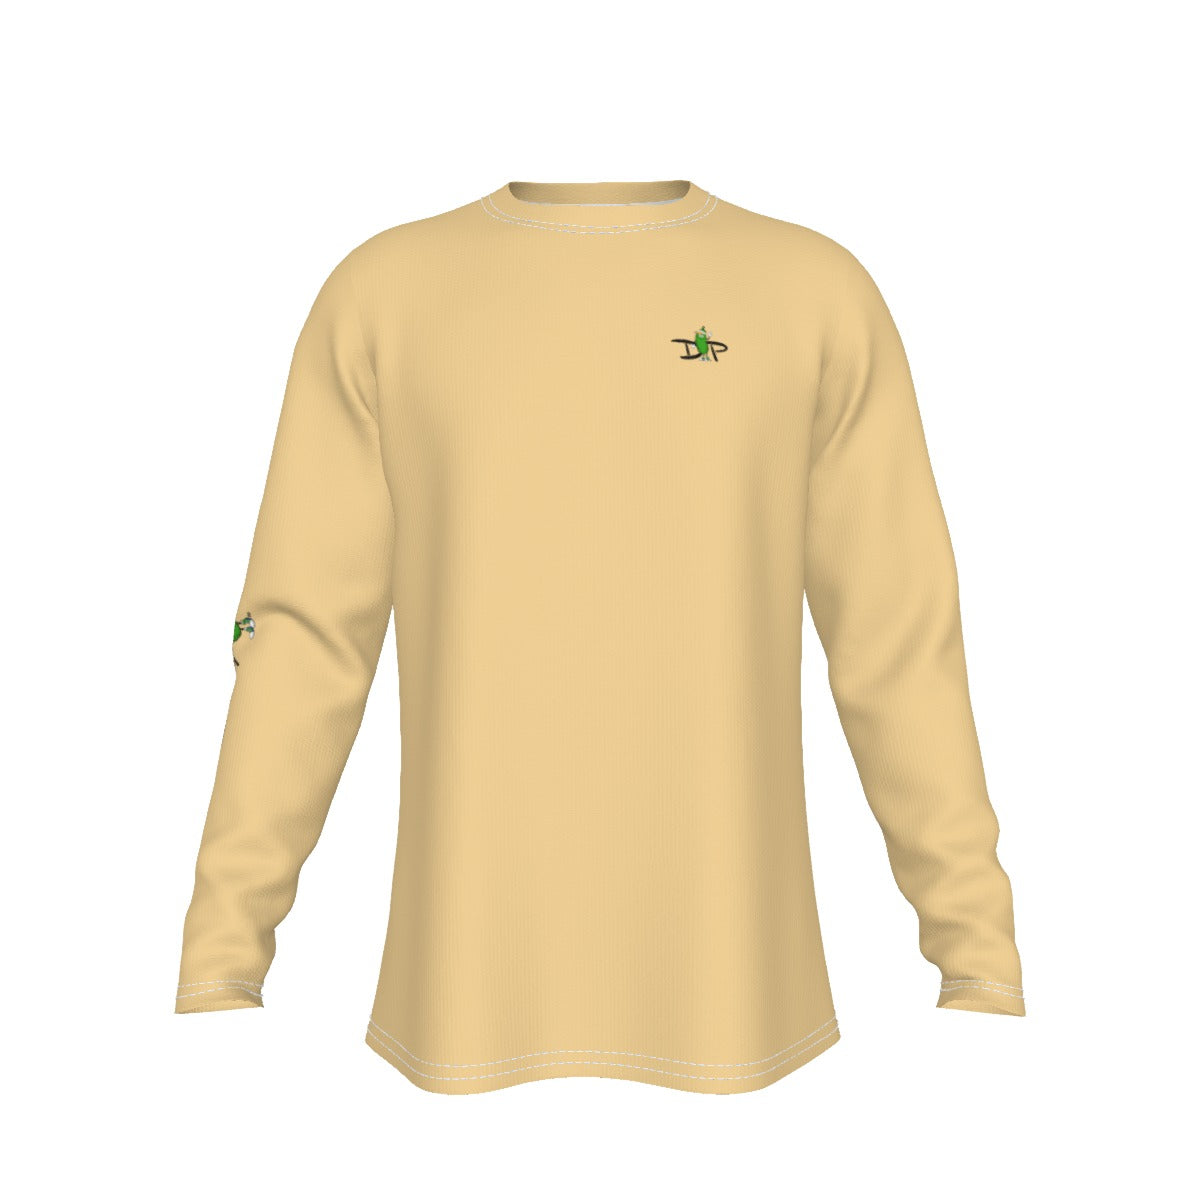 DZY P Classic - Sand - Men's Long Sleeve T-Shirt by Dizzy Pickle